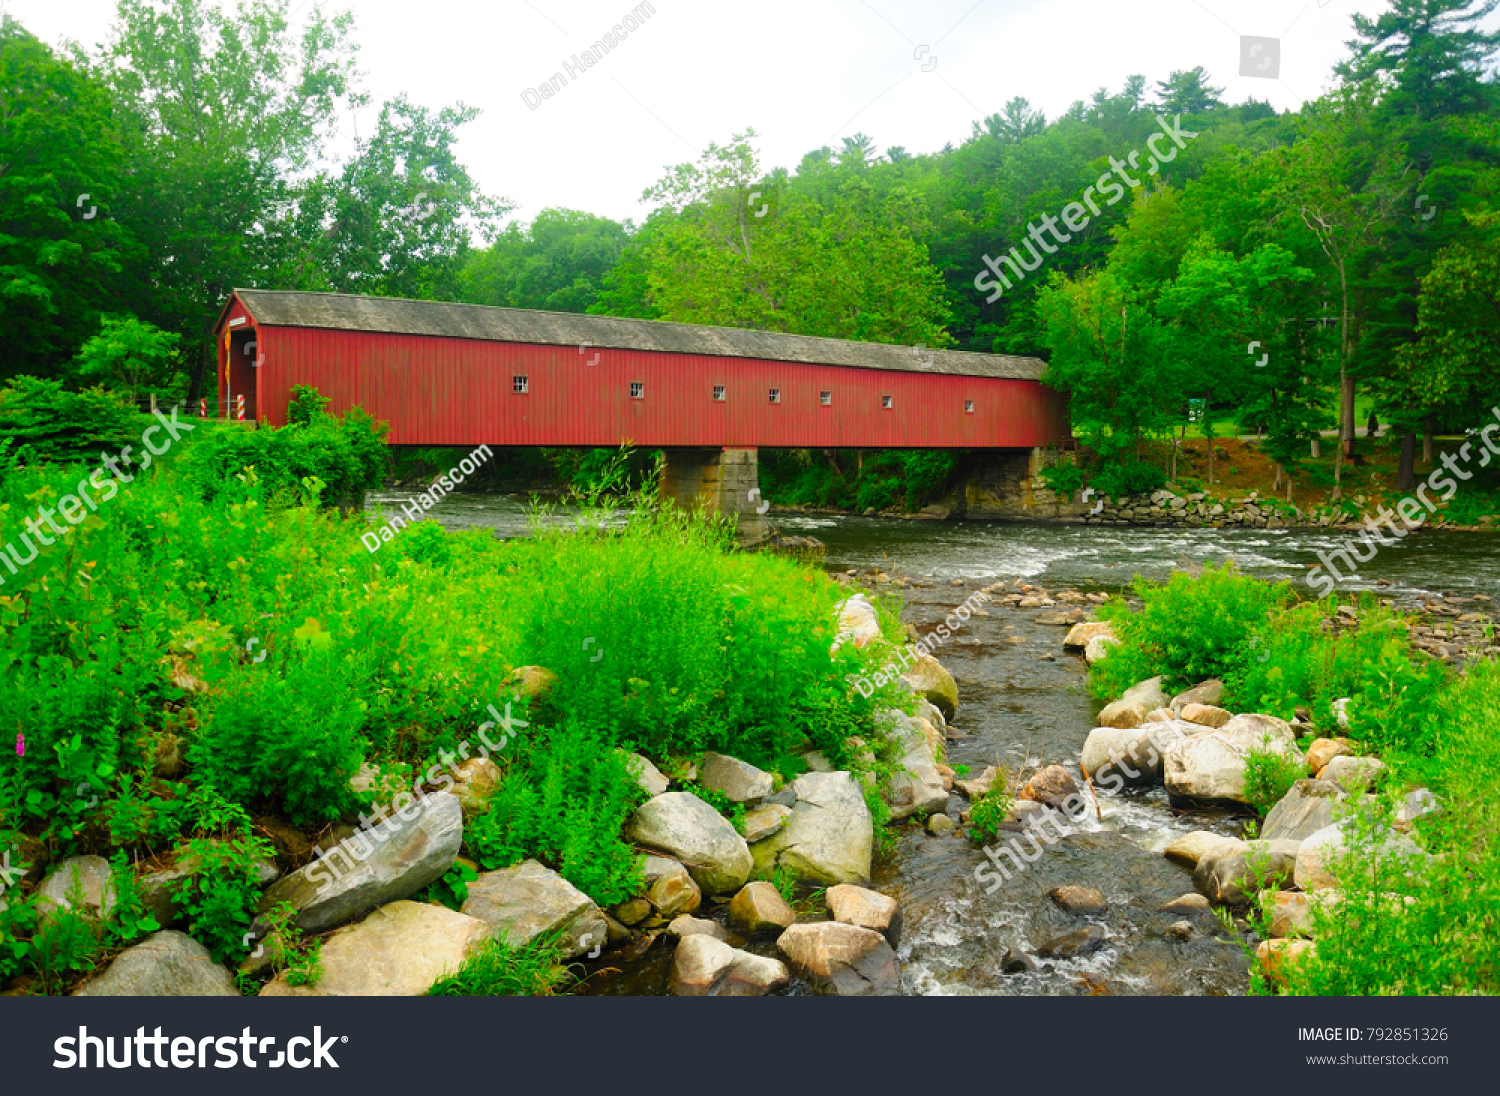 The landmark West Cornwall covered bridge over the Housatonic River in West Cornwall Connecticut in the summer.   #792851326